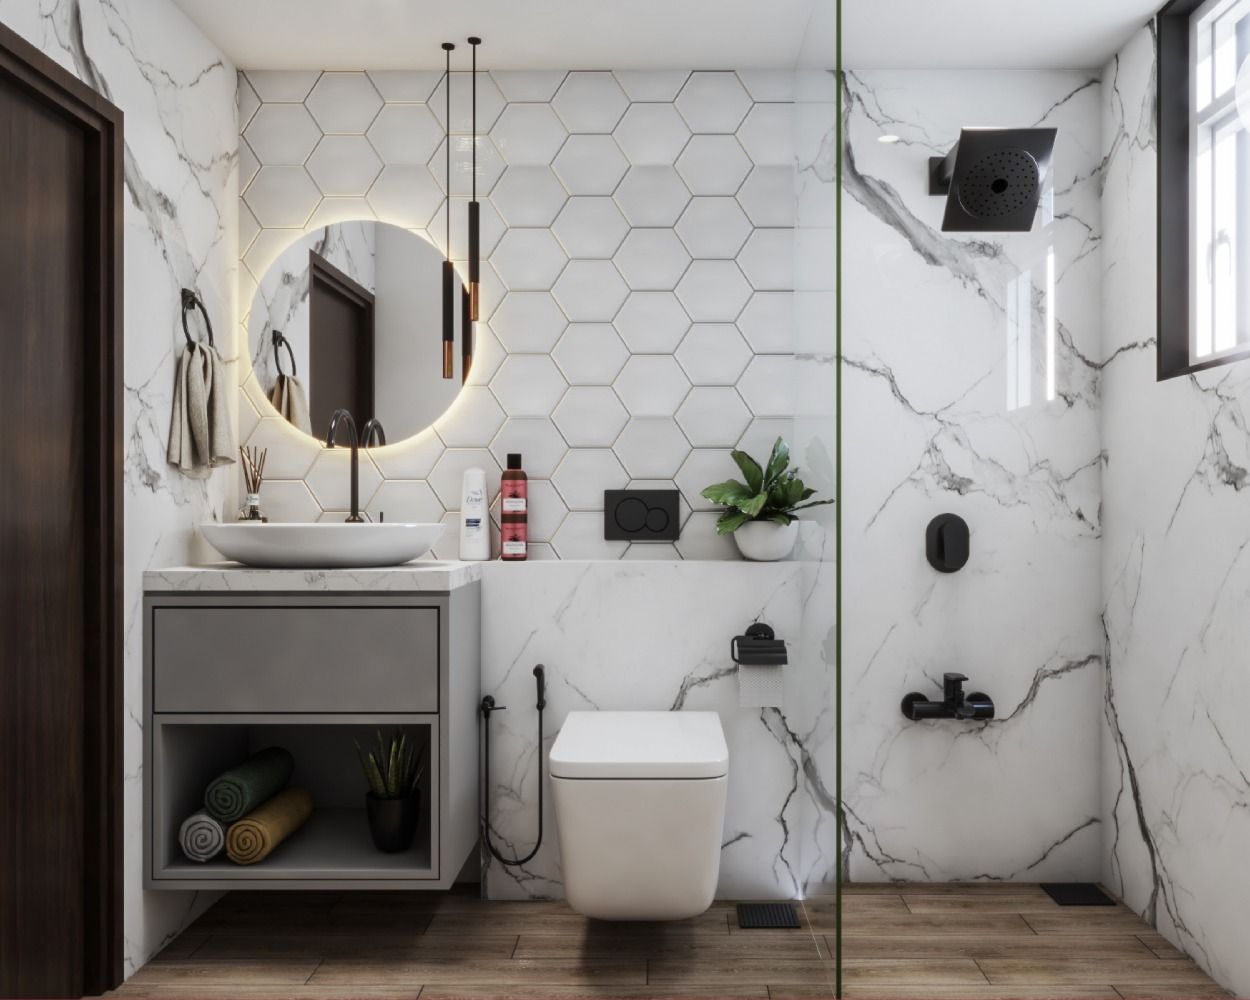 Contemporary Small Bathroom Idea With White Patterned Wall Tiles